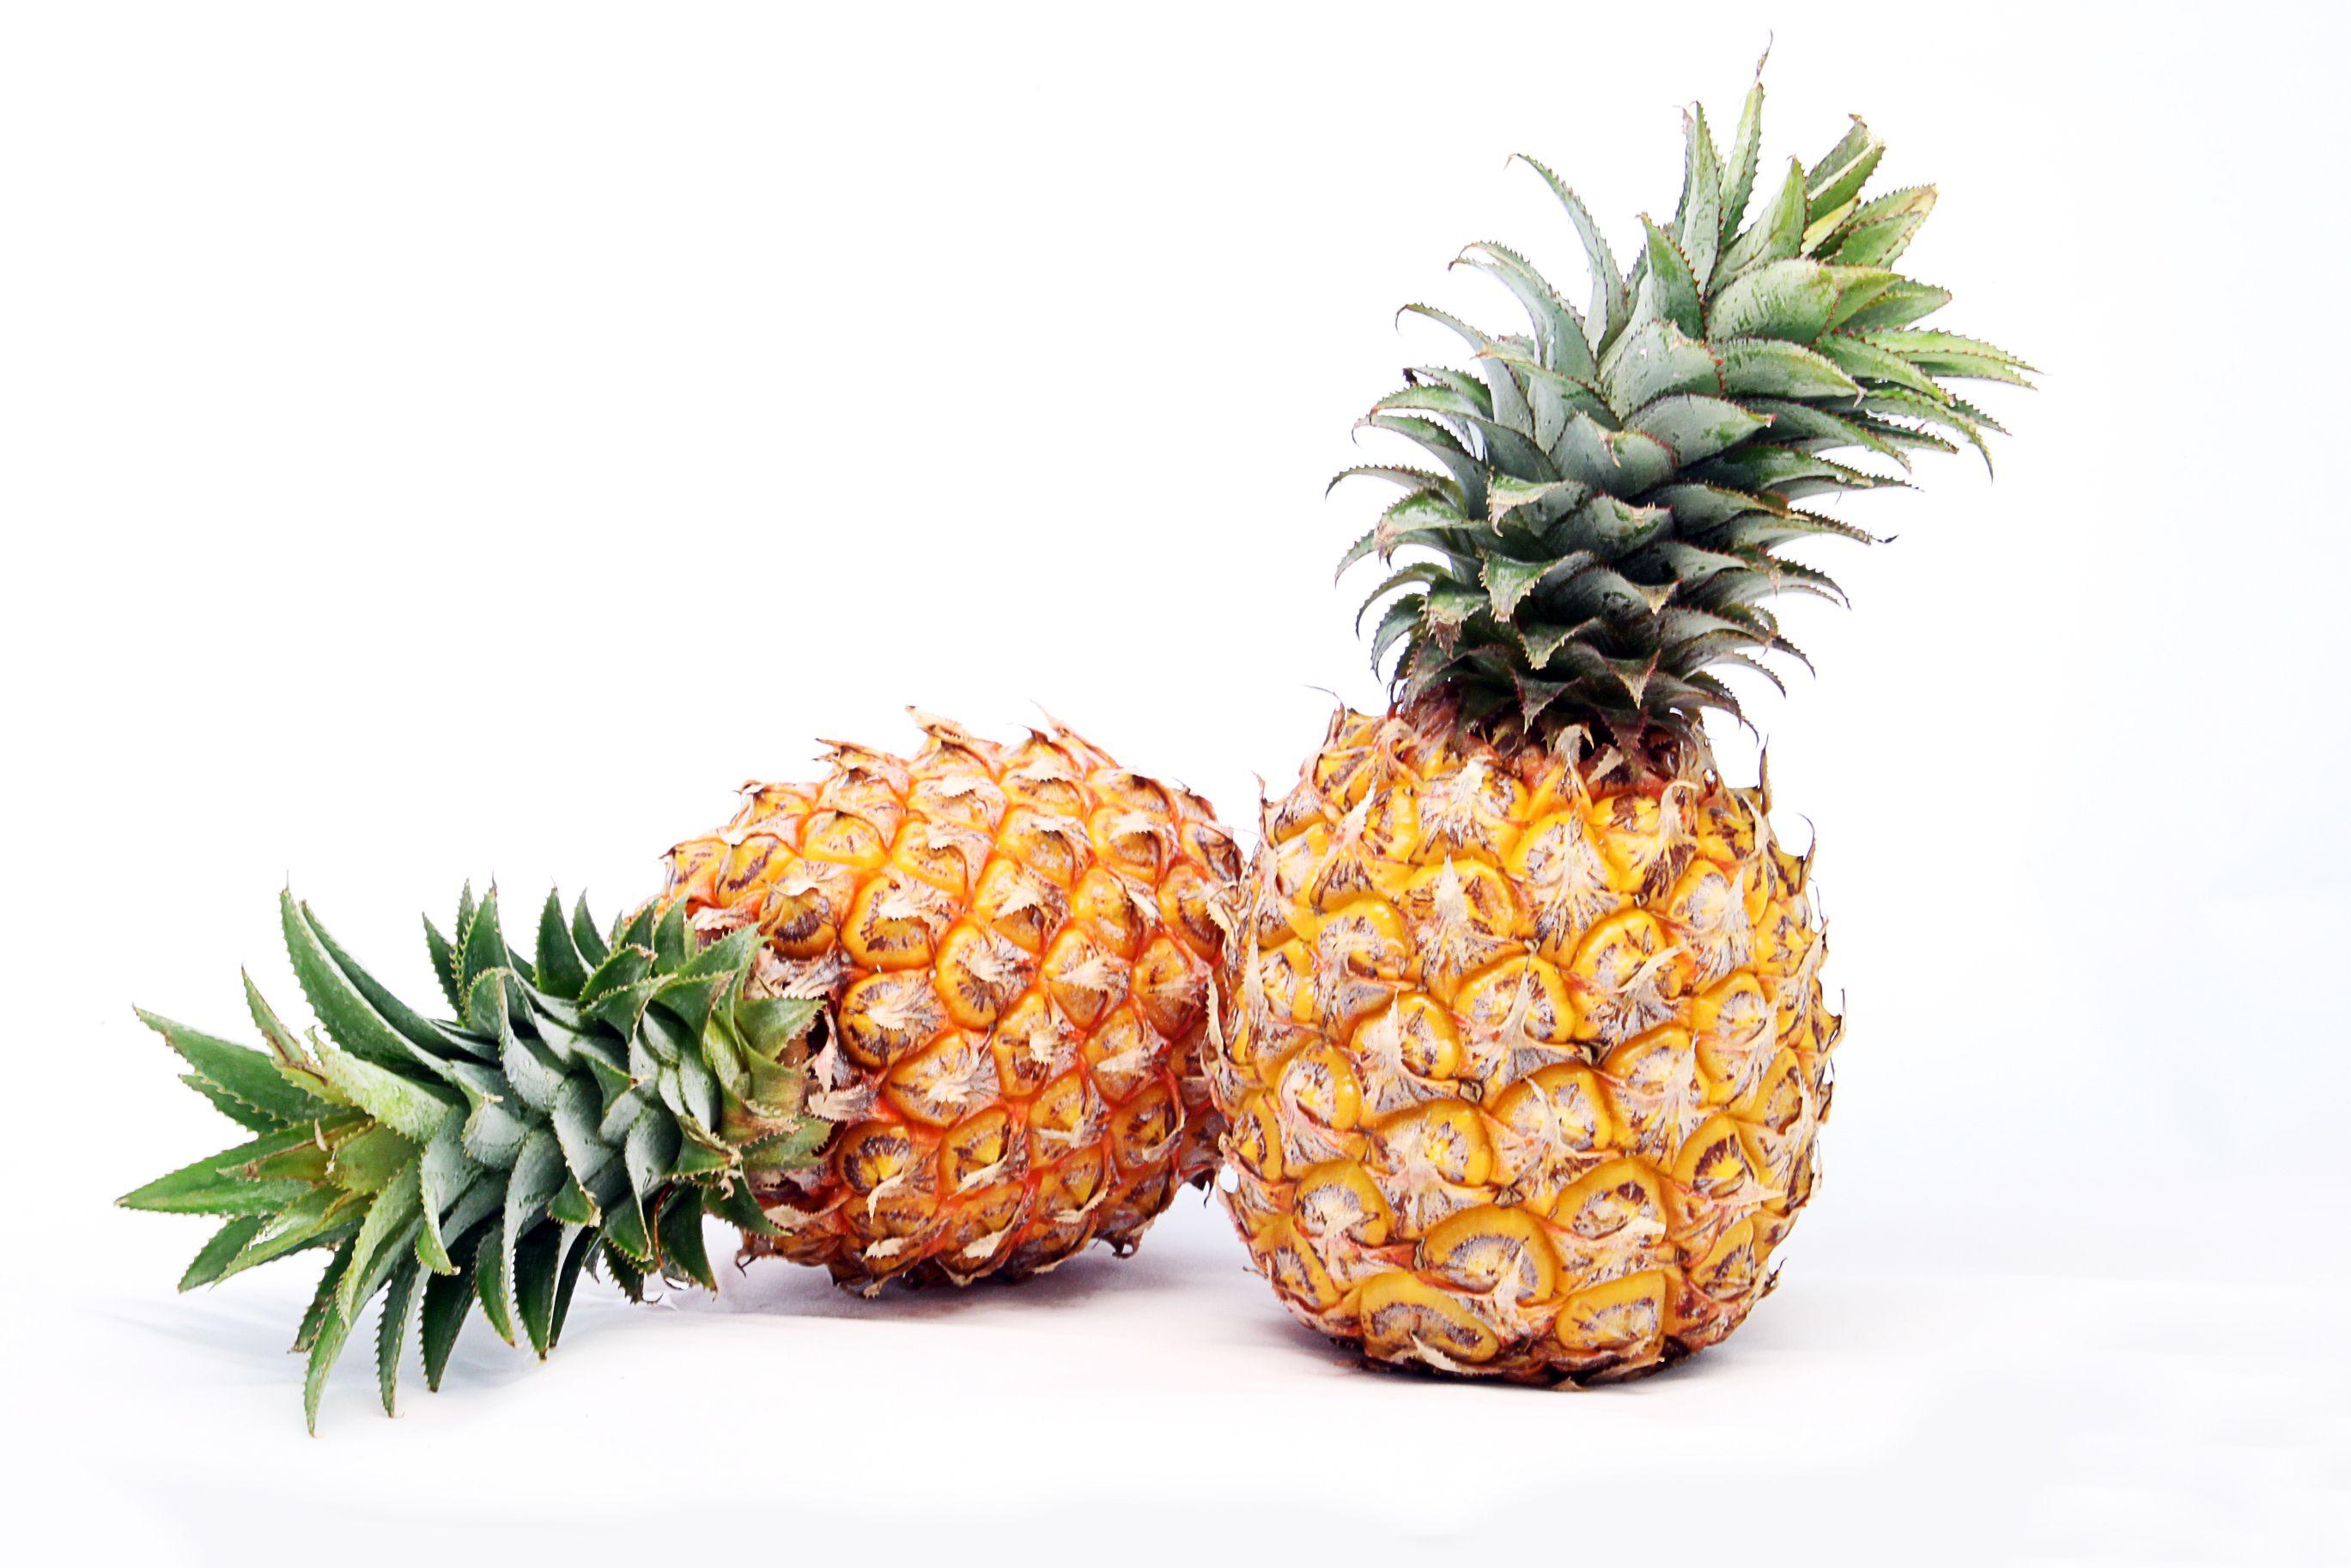 Pineapple Hd Wallpapers Wallpaper Cave